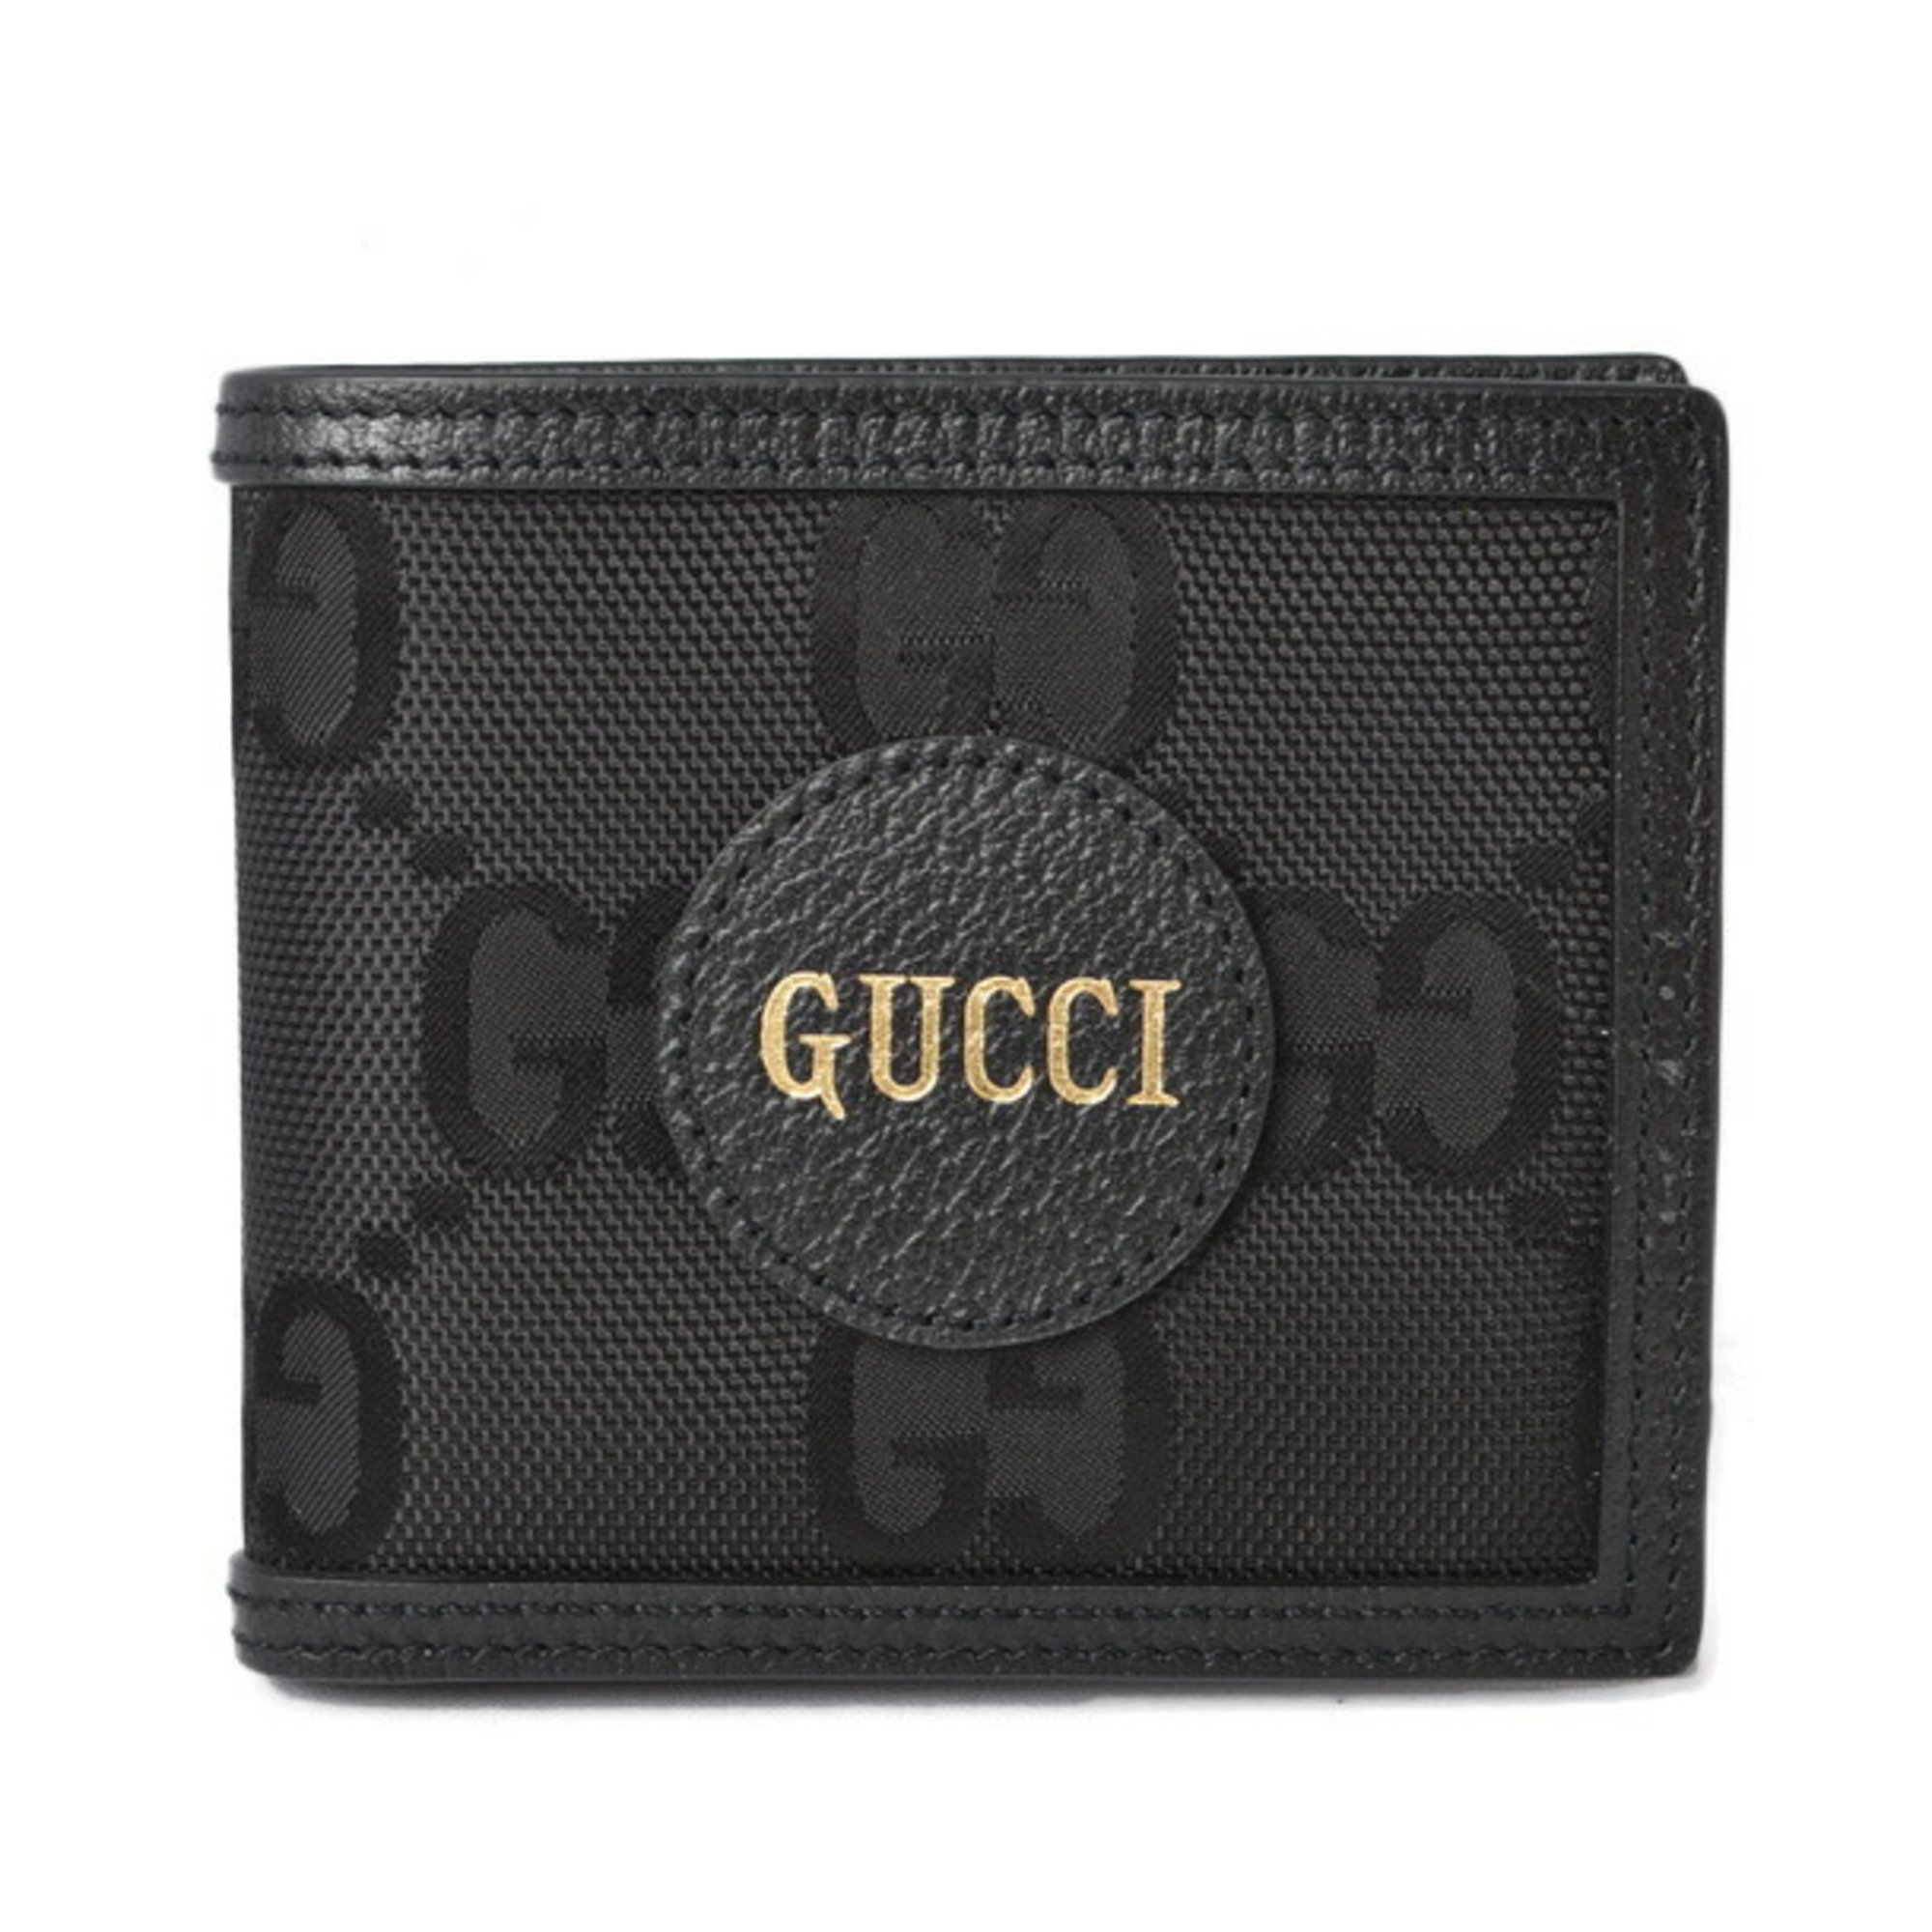 Gucci Wallet Men's GUCCI Folding Off The Grid Coin 625574 H9HAN 1000